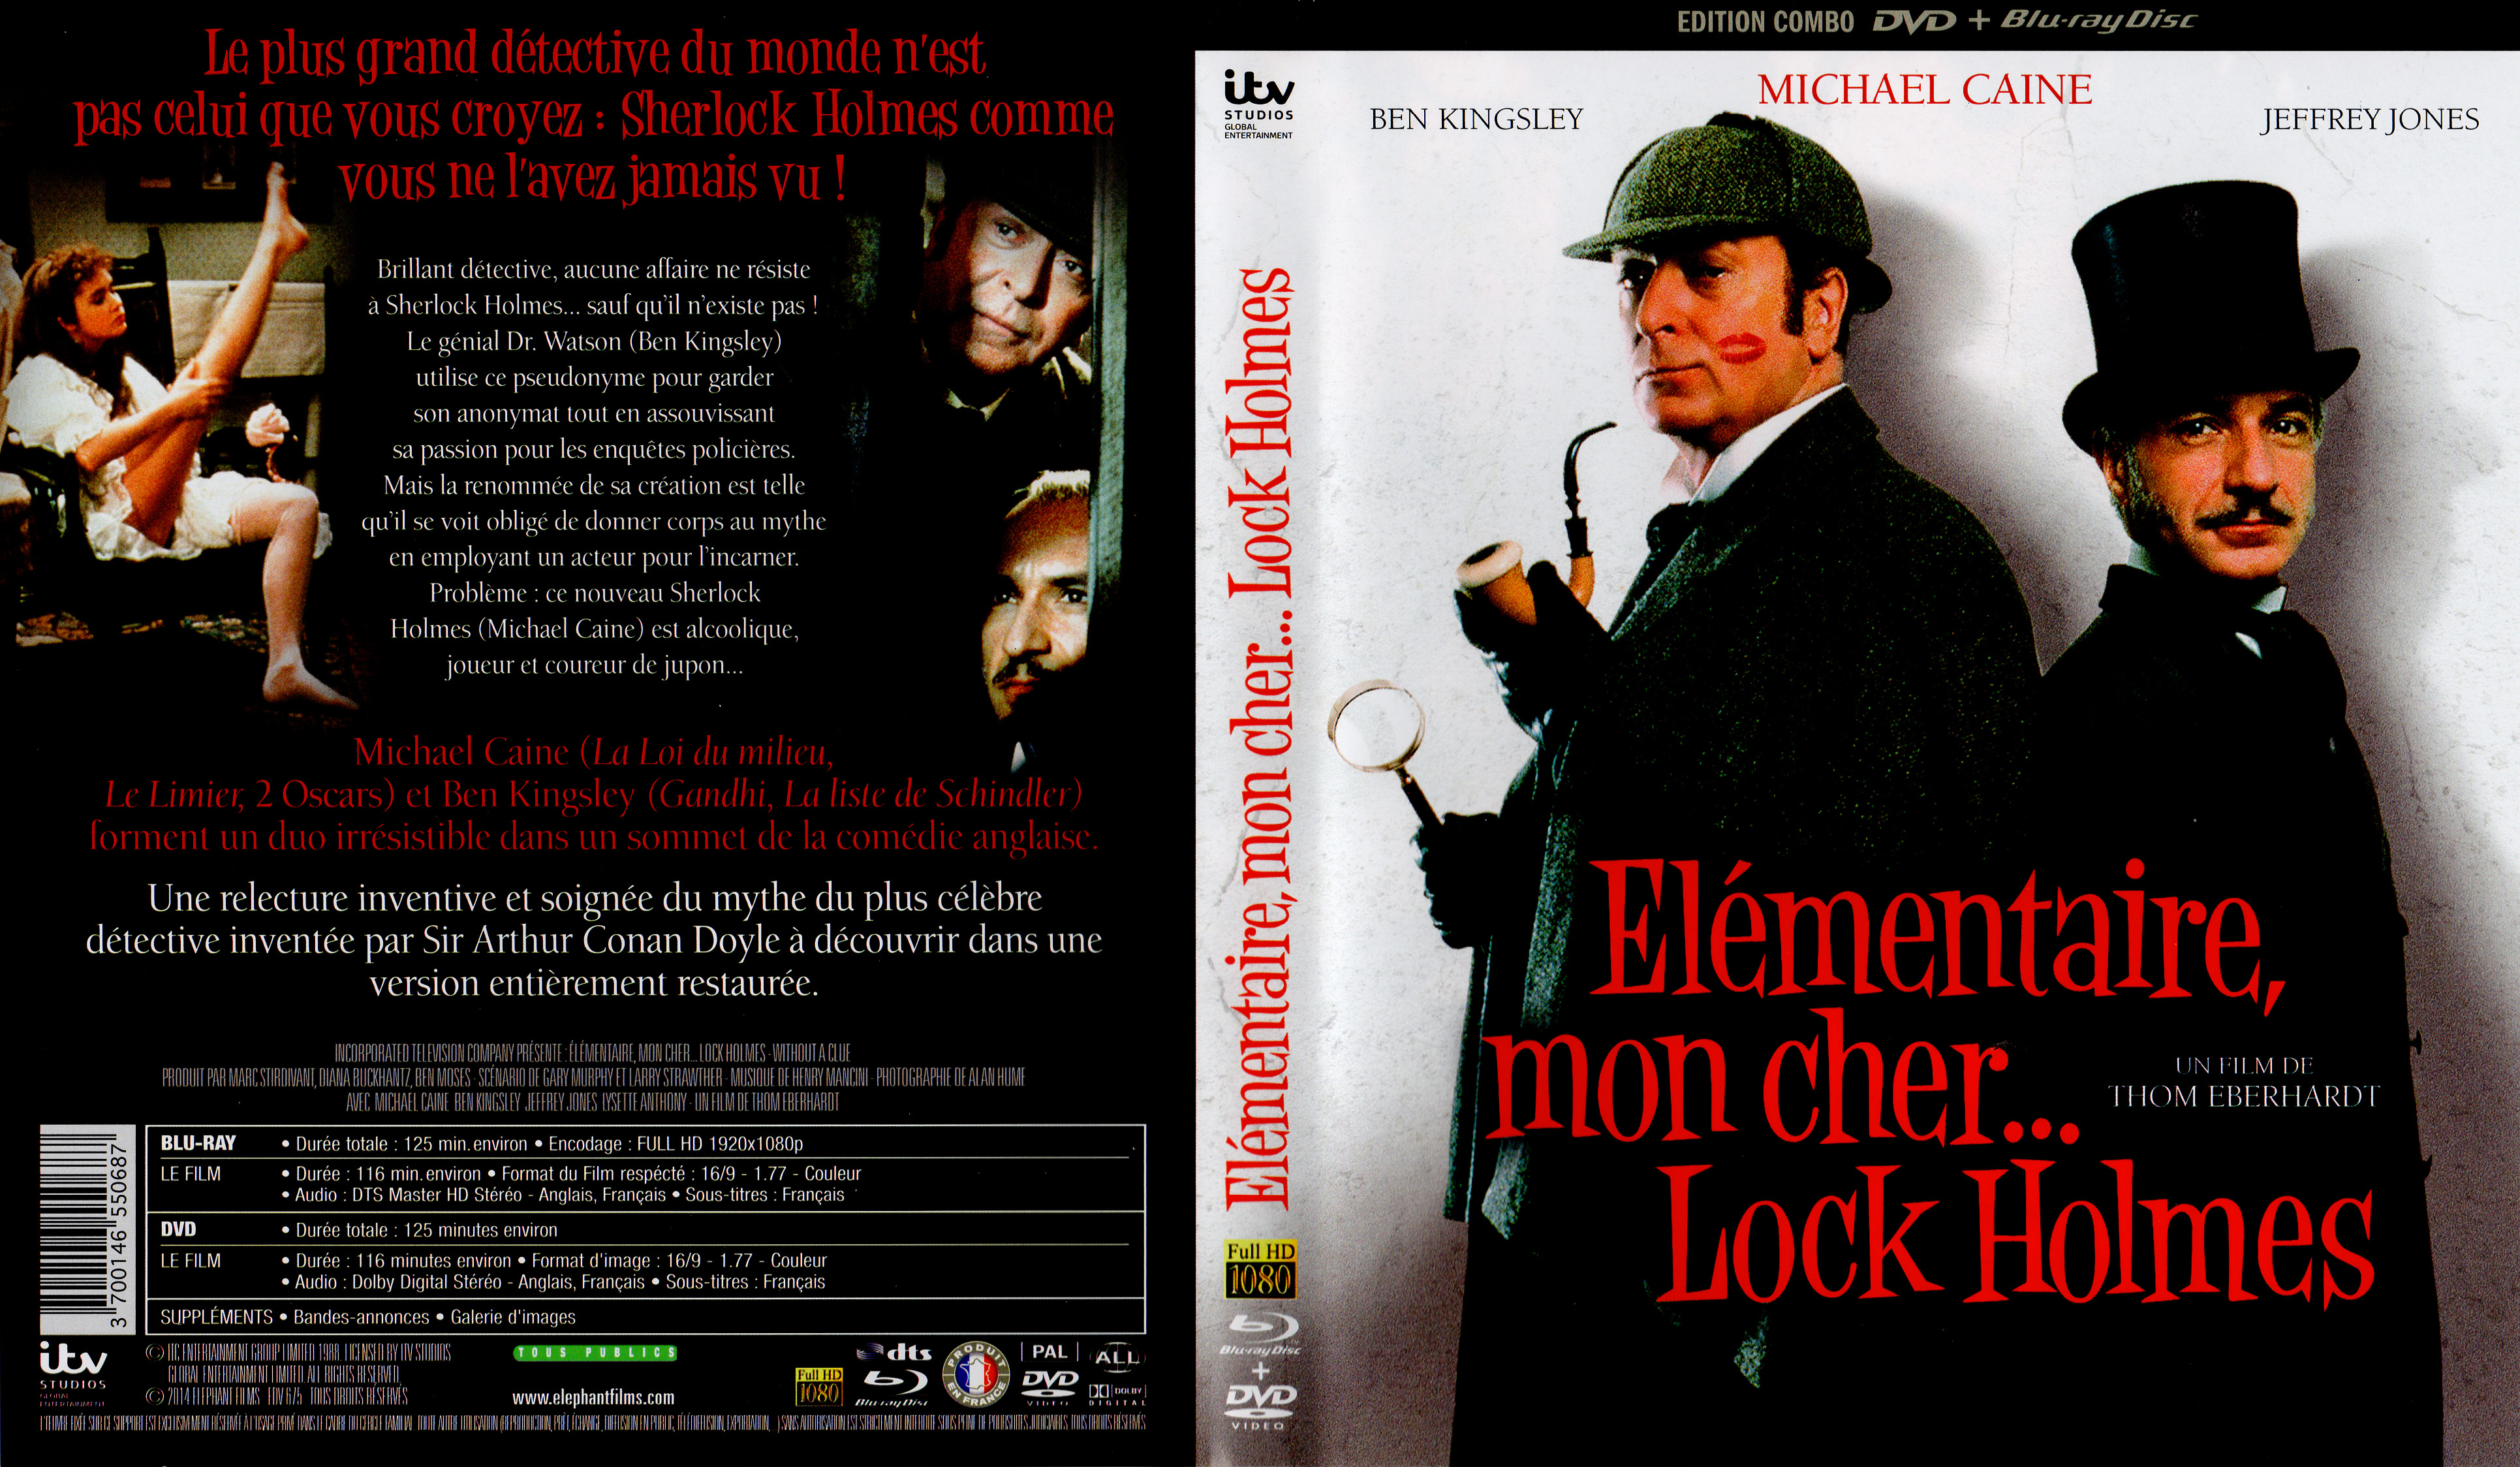 Jaquette DVD Elementaire mon cher Lock Holmes (BLU-RAY)